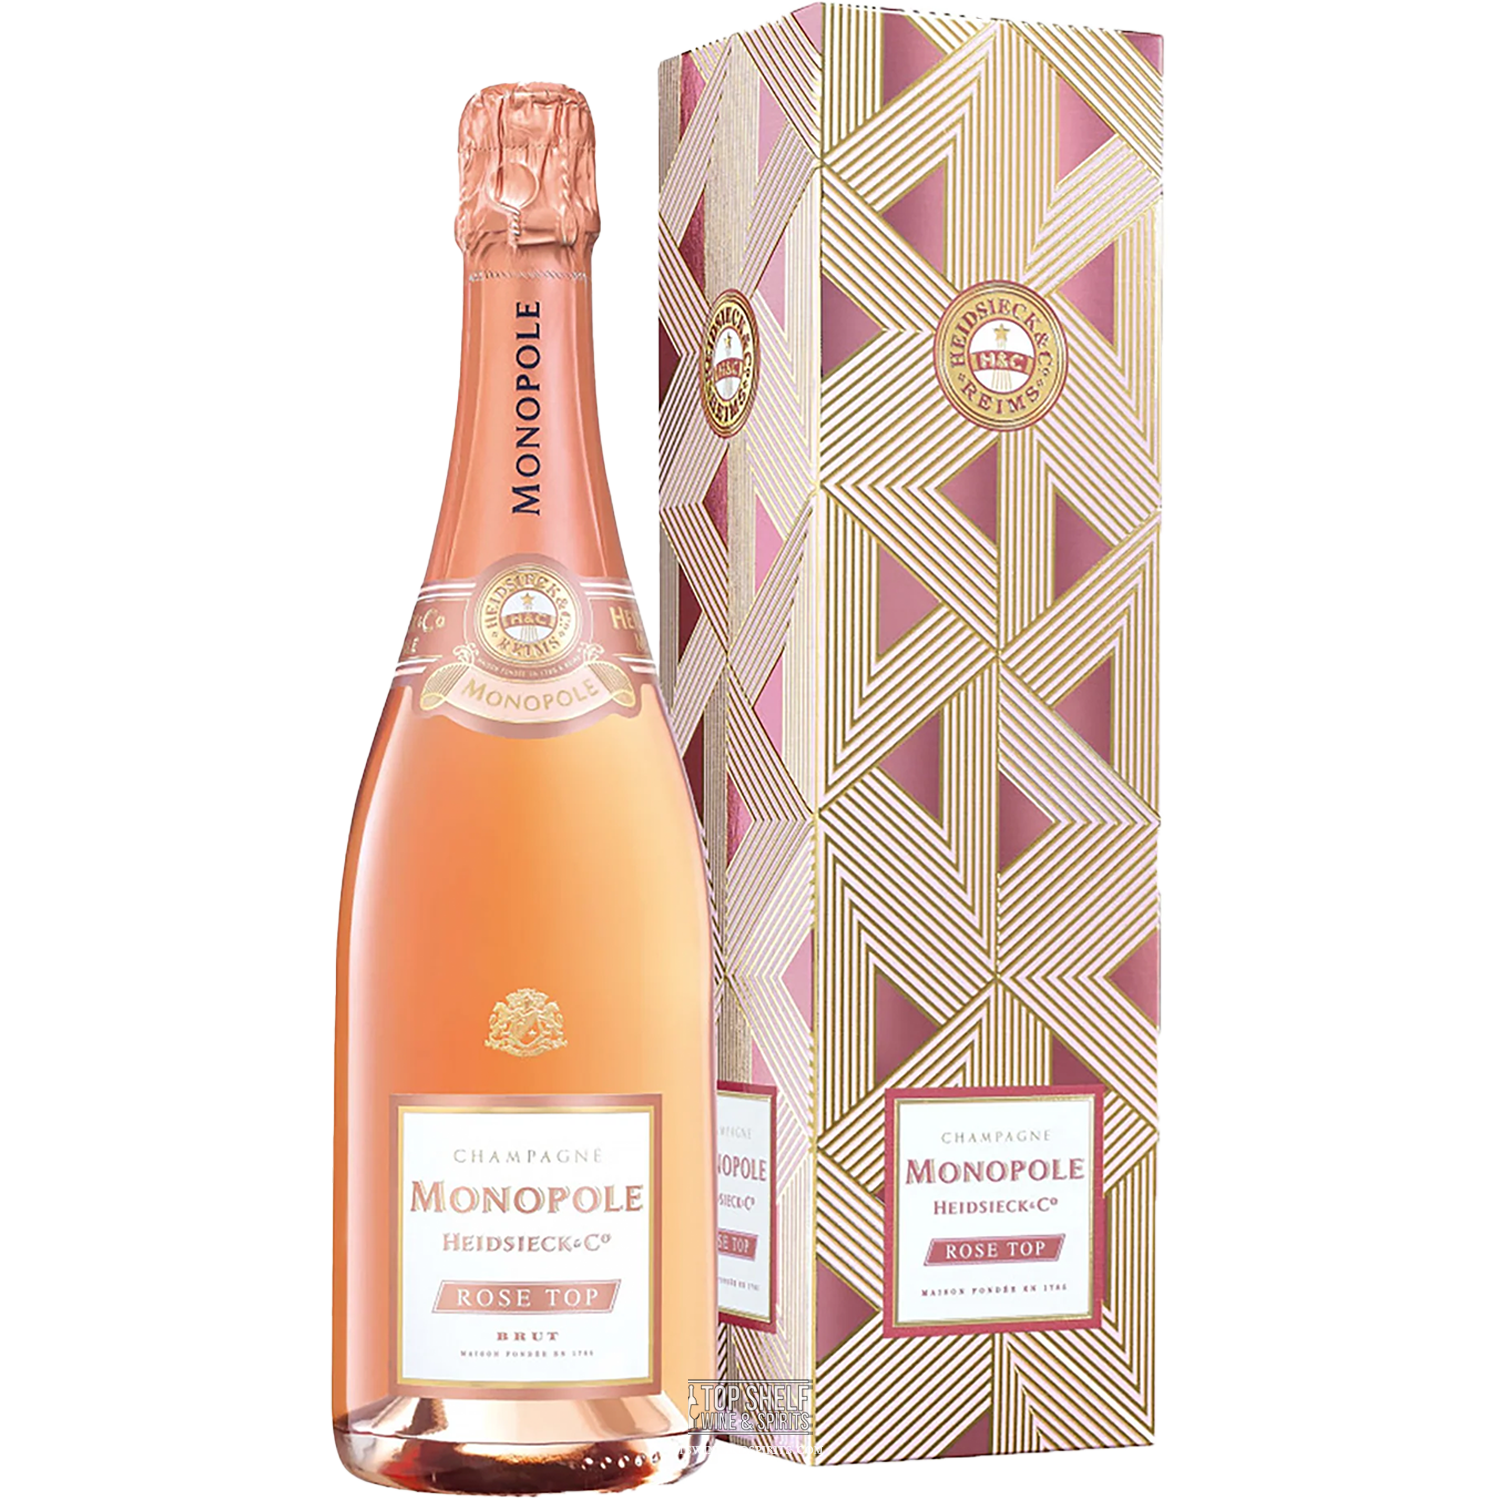 Monopole Heidsieck Brut Rosé Champagne | Delivery & Gifting